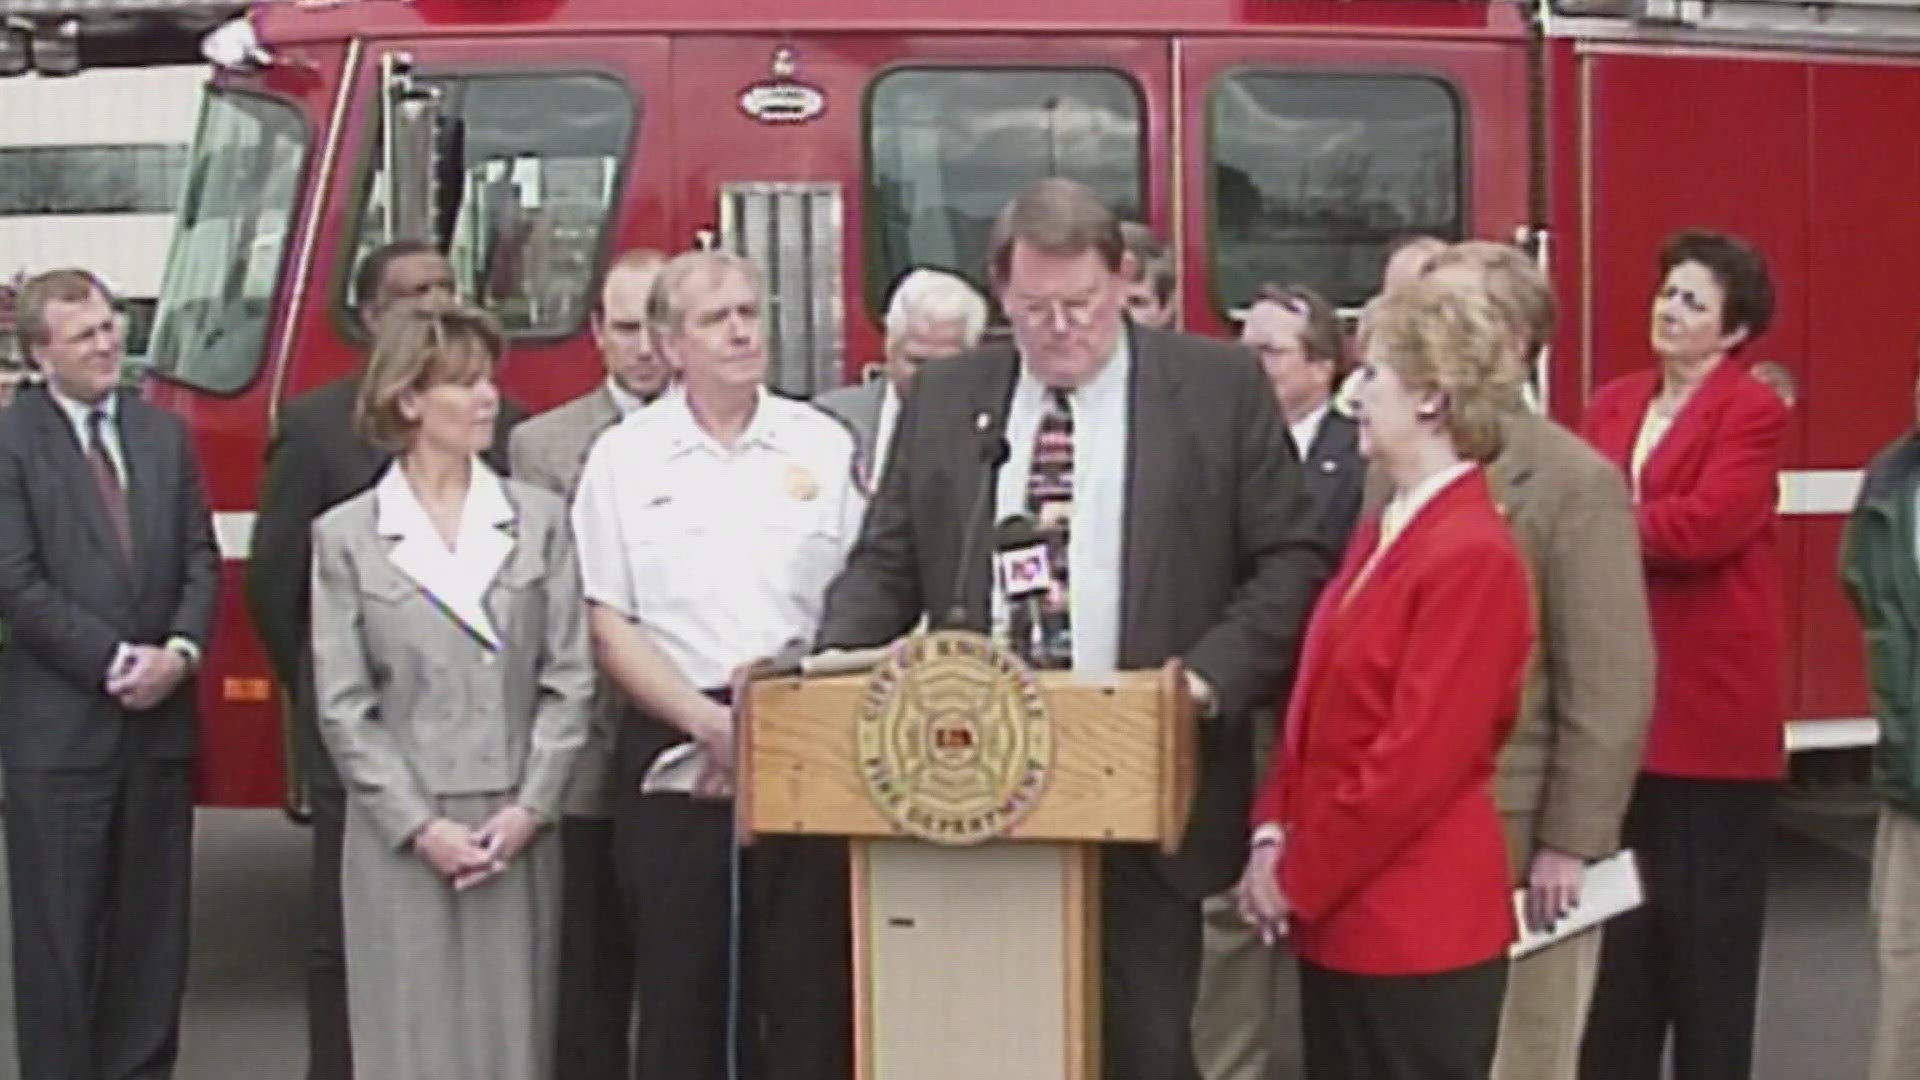 The Knoxville Fire Department said Bruce Cureton served as chief from 1982 to 1997.